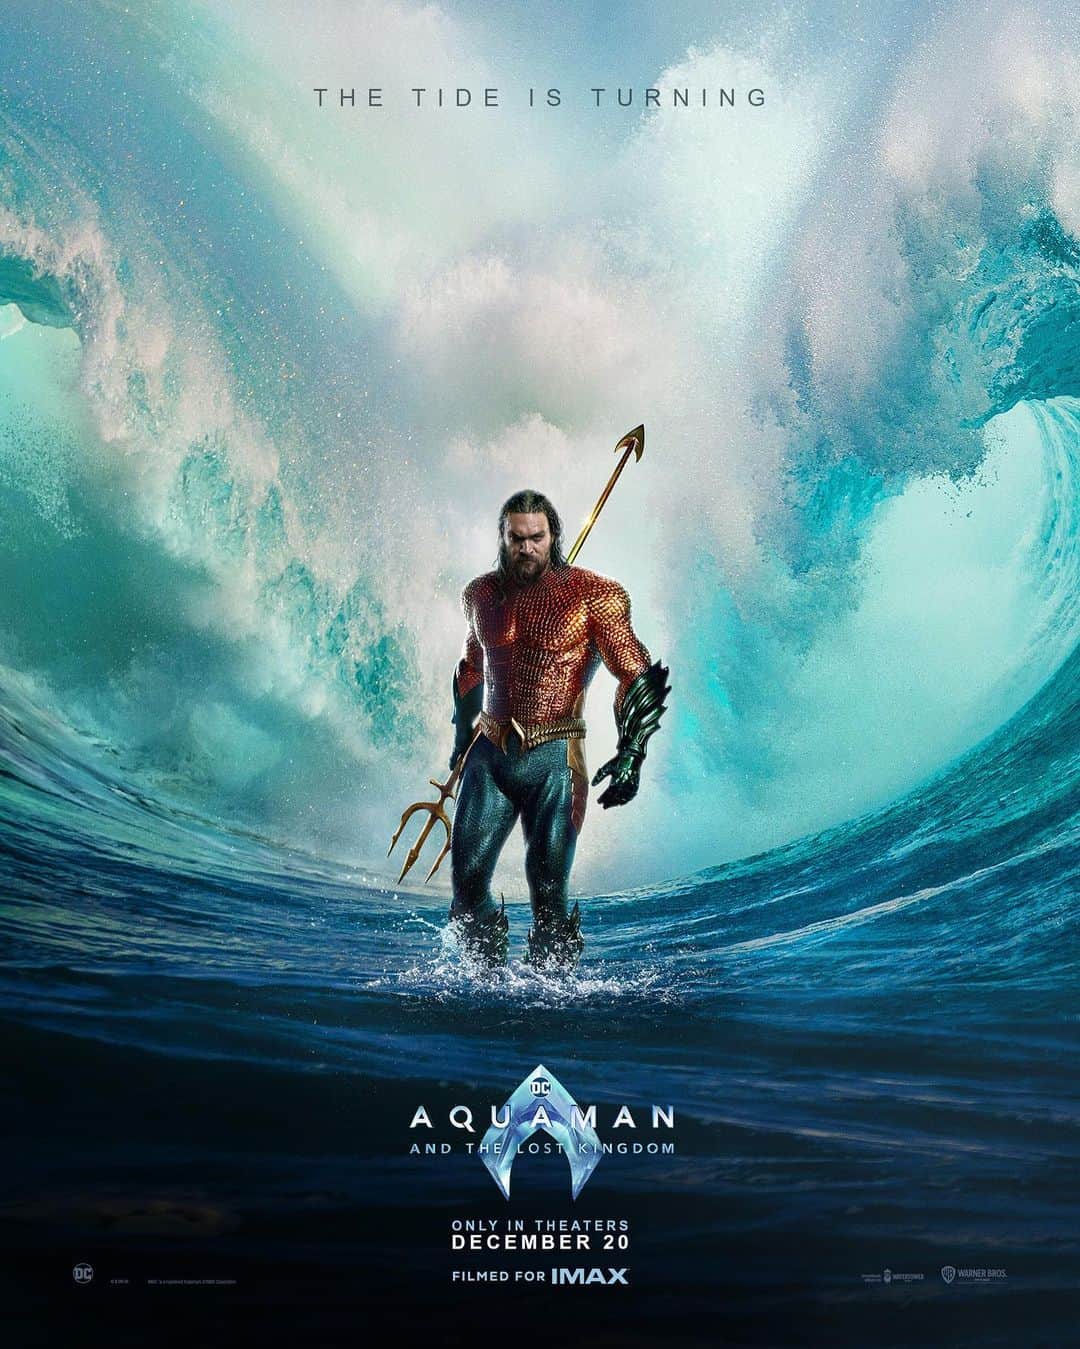 Warner Bros. Picturesのインスタグラム：「The tide is turning. #Aquaman and the Lost Kingdom - Only in theaters December 20.」